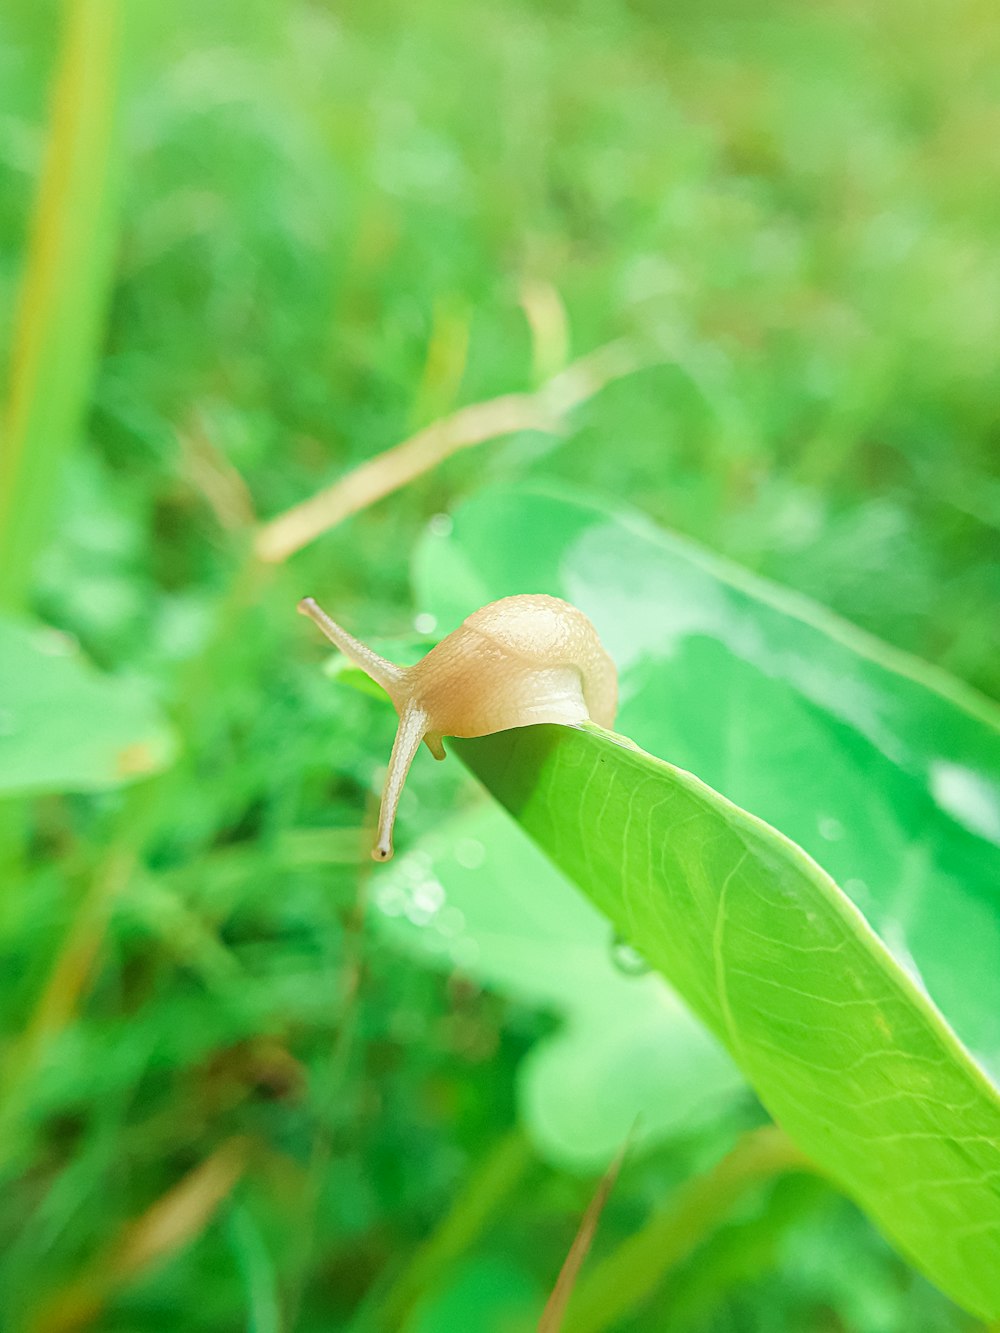 a snail crawling on a green leaf in the grass